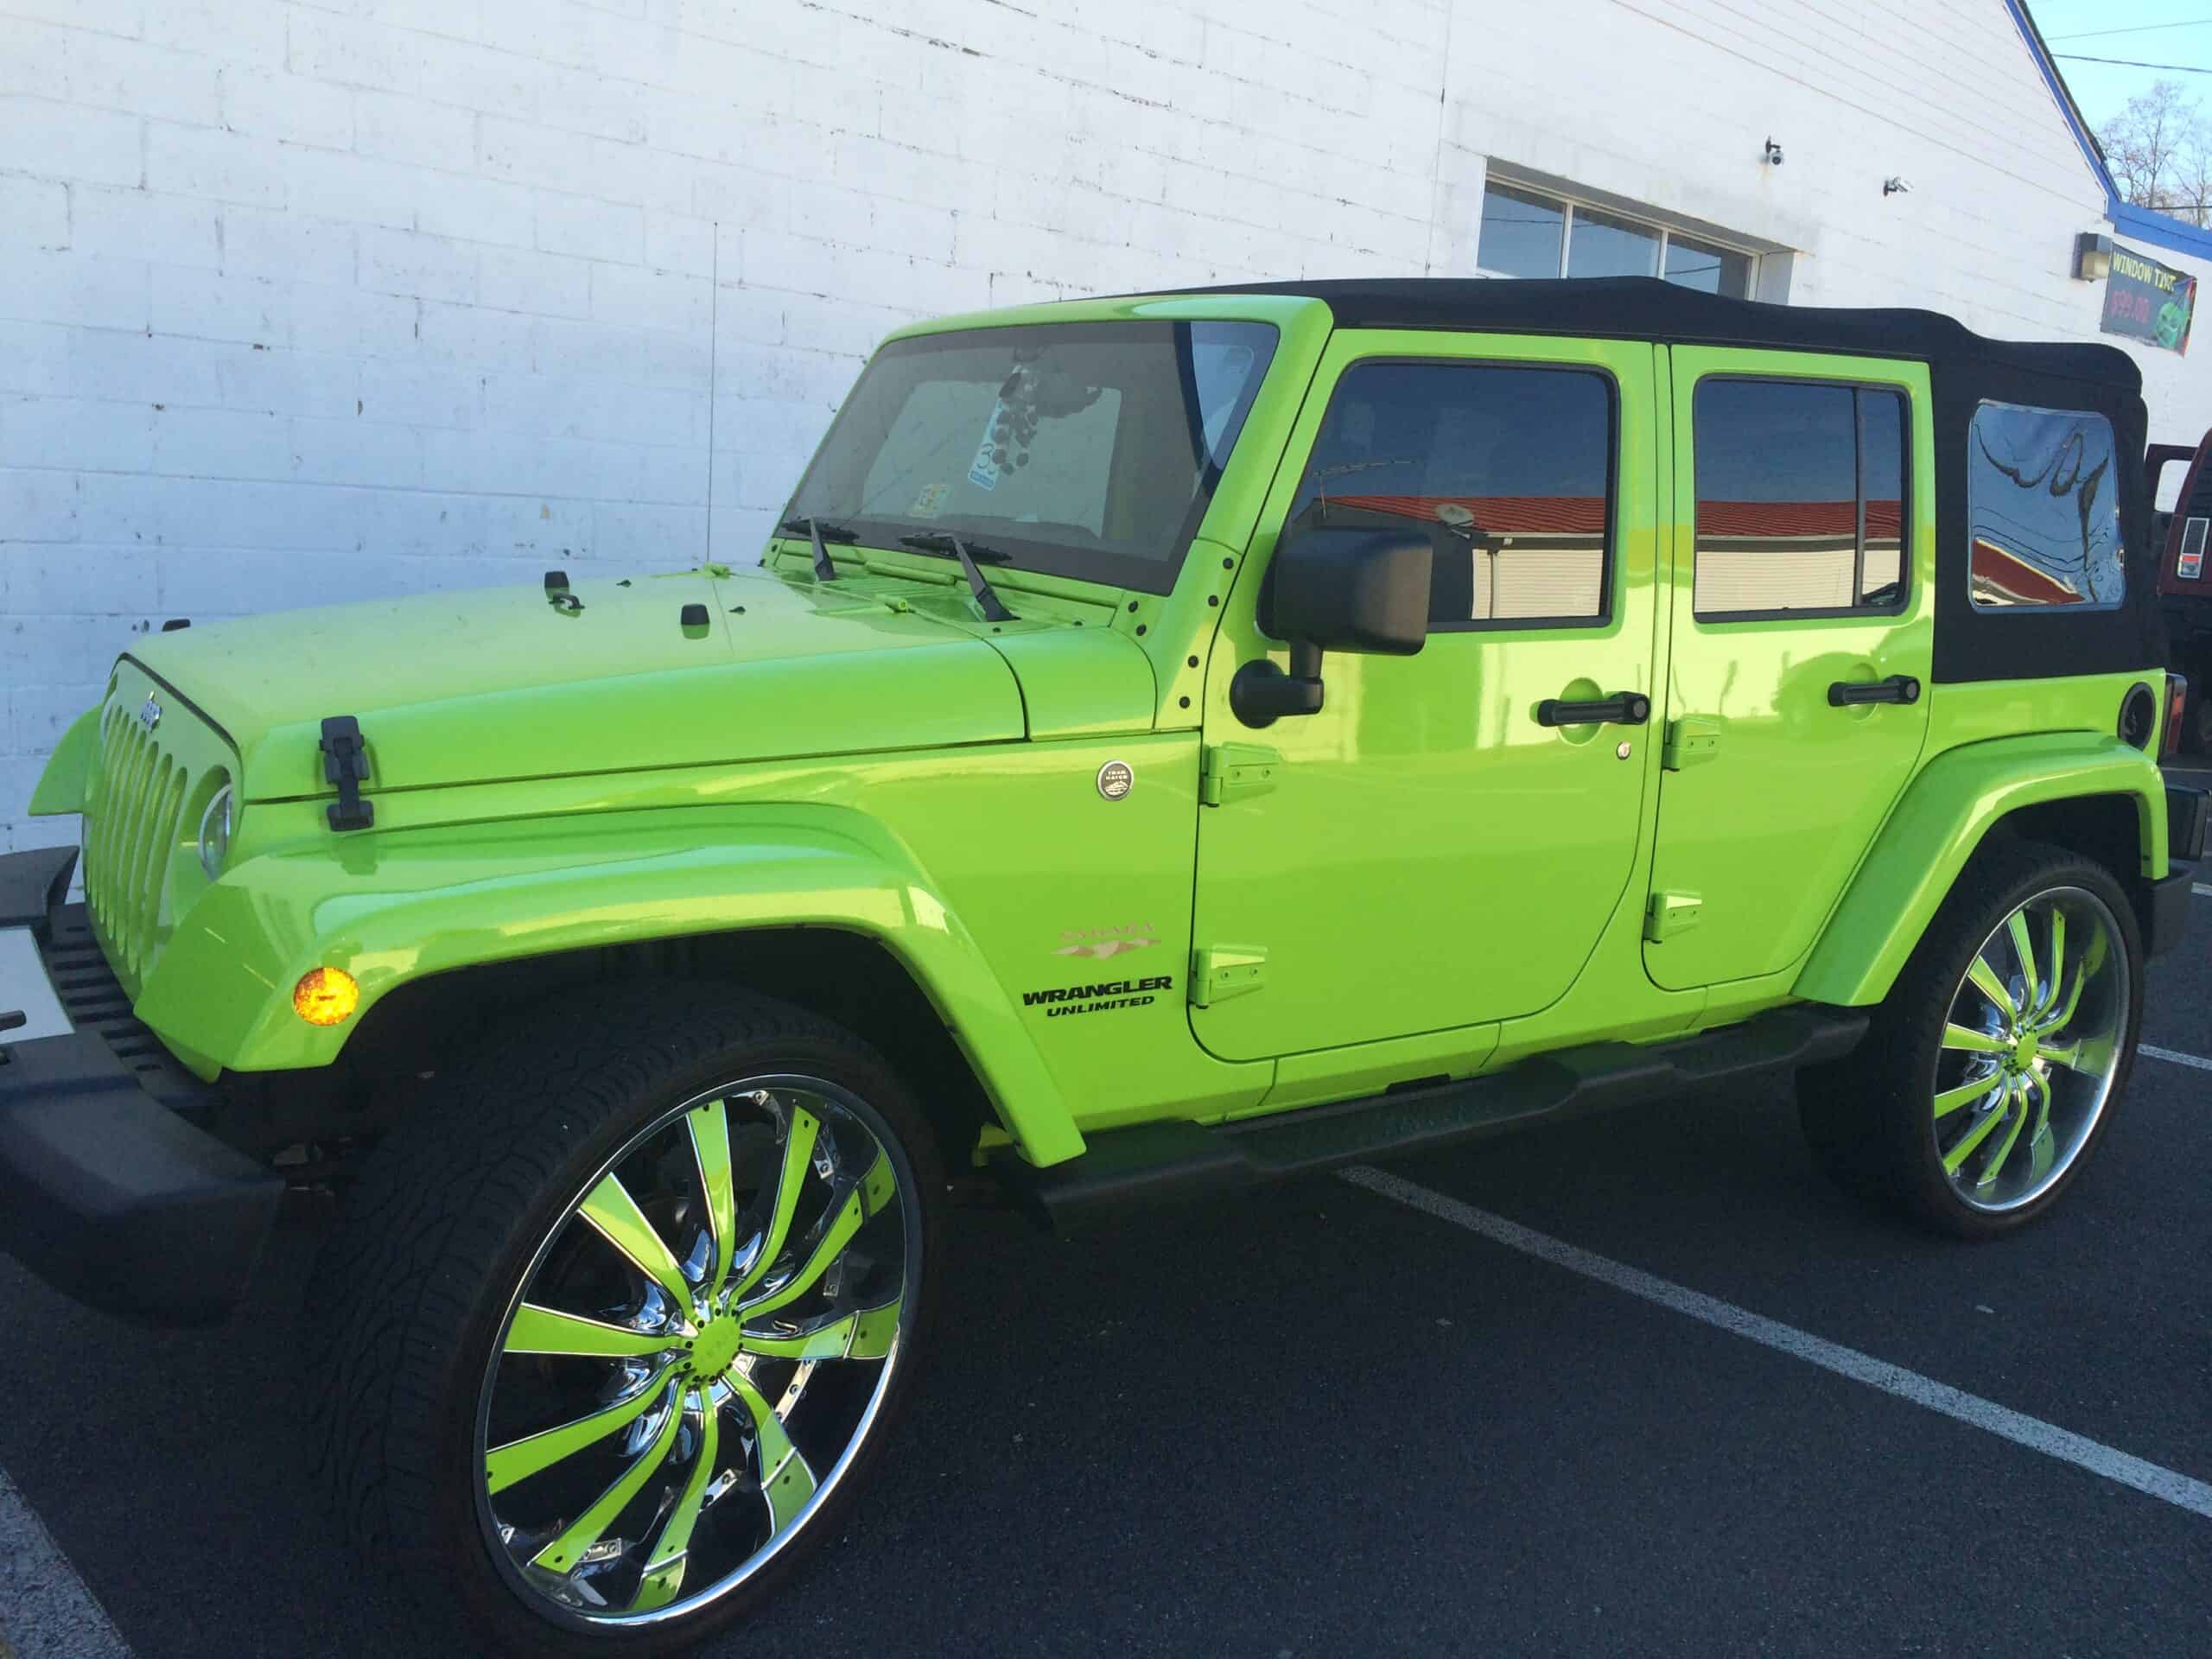 Windows tinting in a green Jeep Wrangler